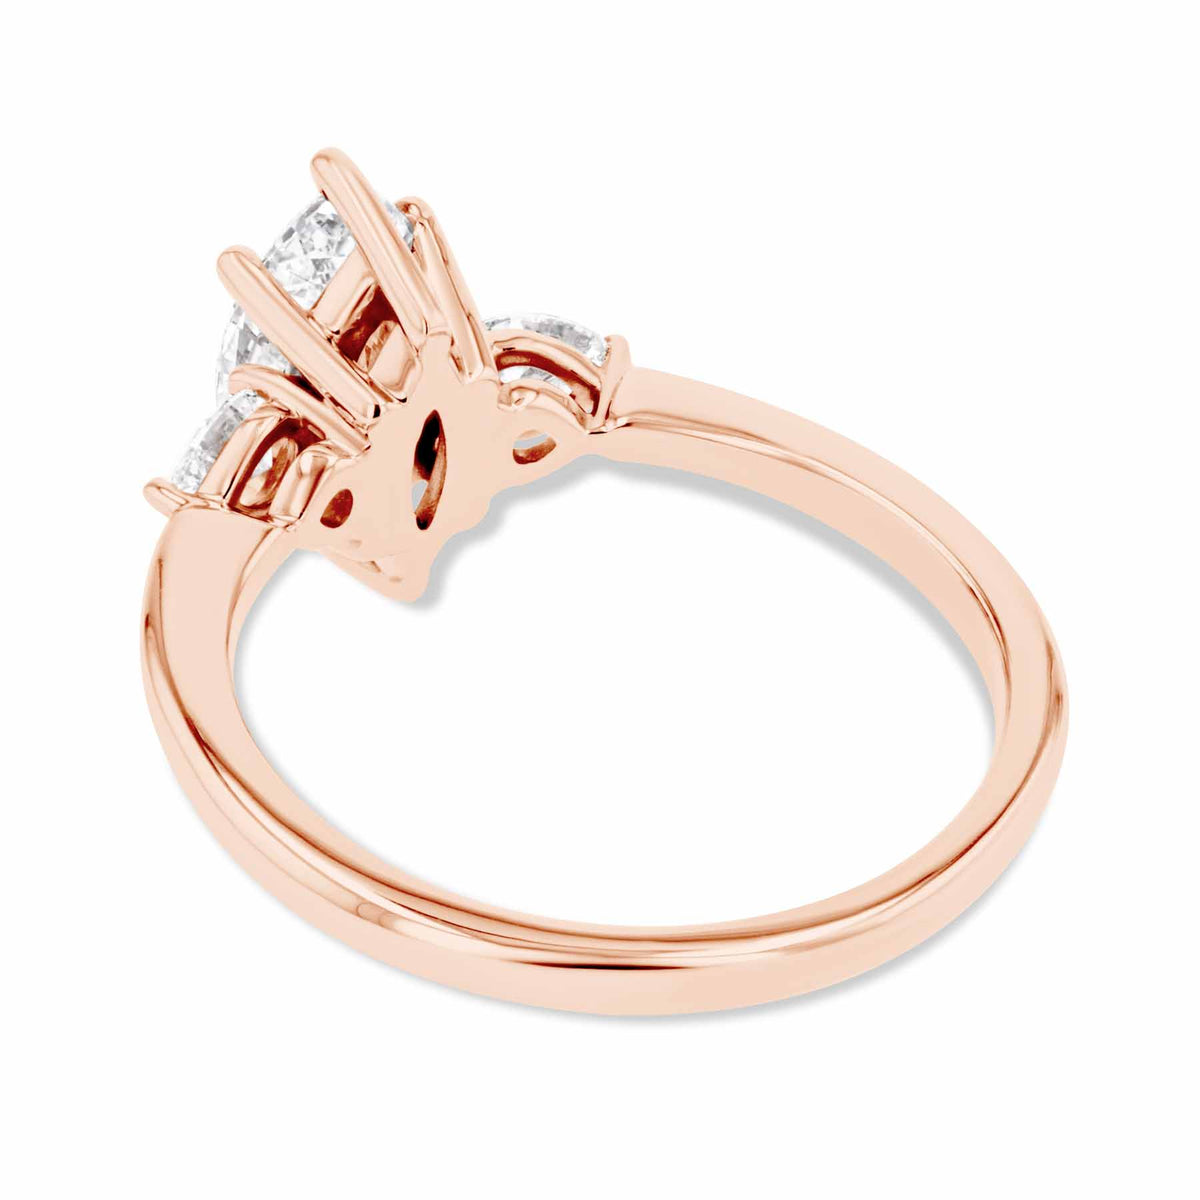 Flourish Three Stone Engagement Ring with a 1.15ct Lab-Grown Diamond center stone set in 14K Rose Gold